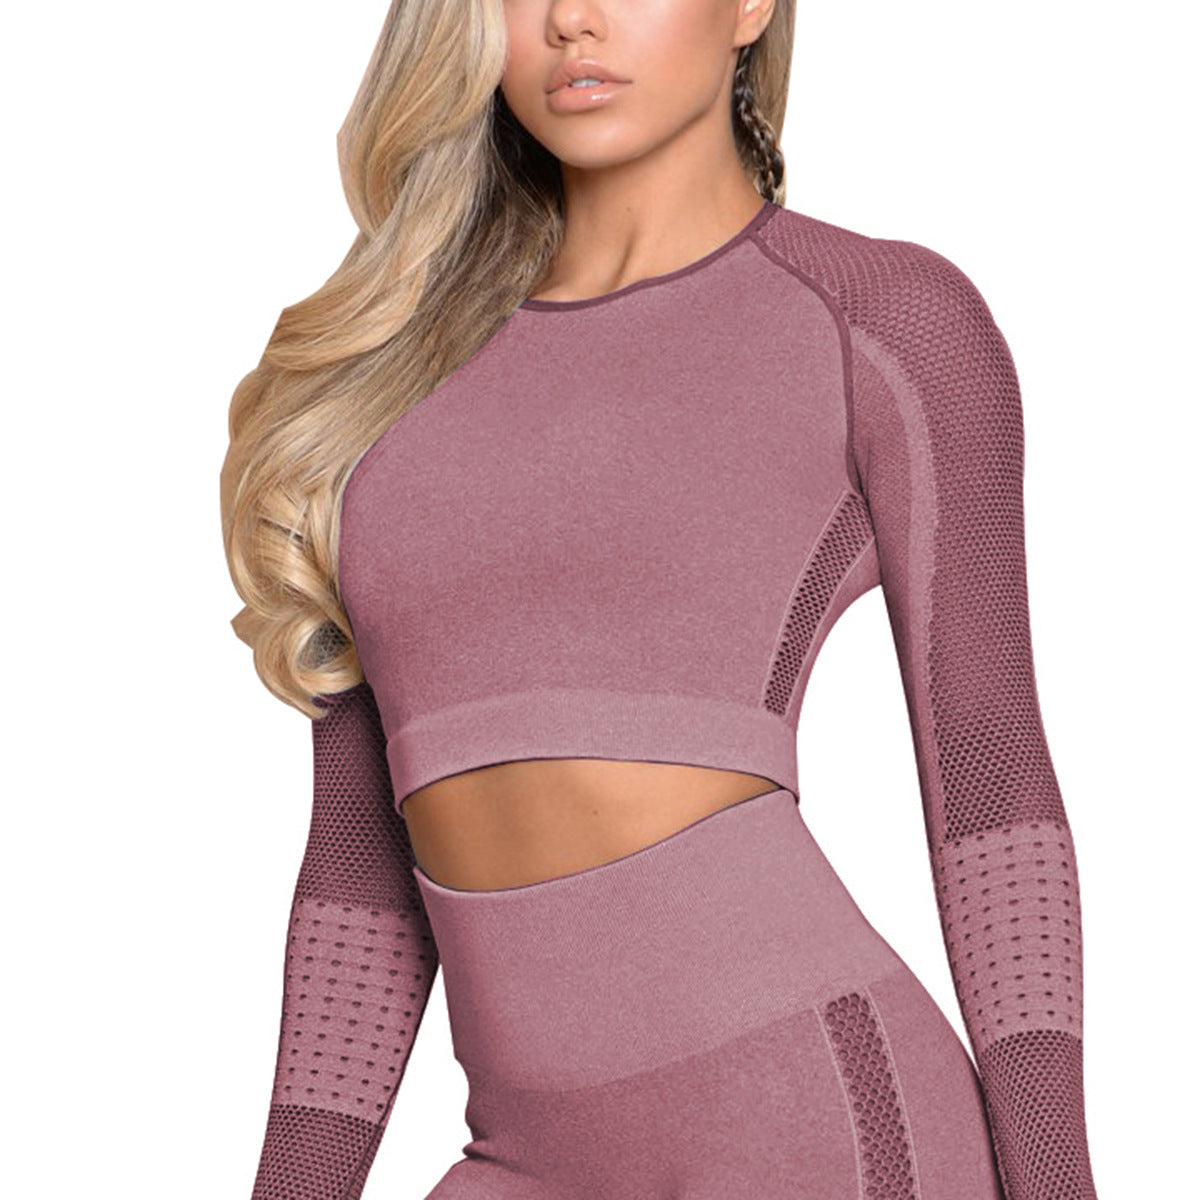 CB Crop Top Seamless Yoga set freeshipping - Cassy's Boutique